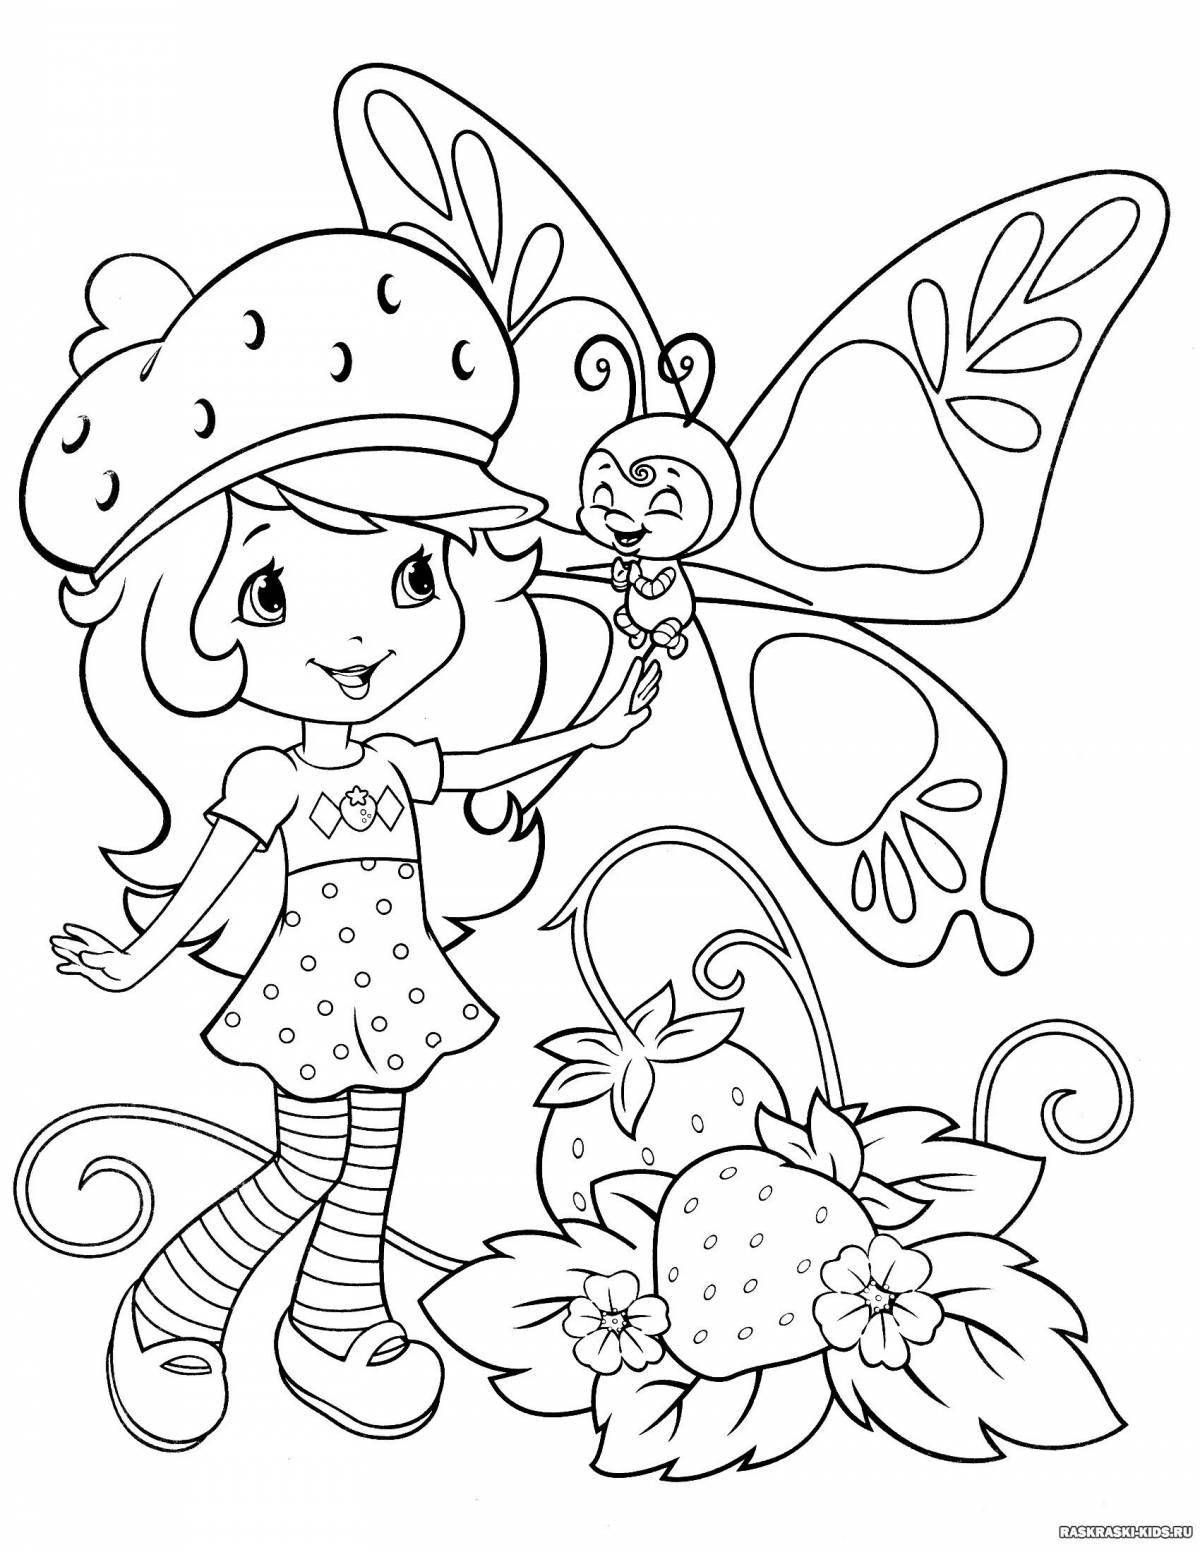 Amazing coloring pages for girls 5 years old